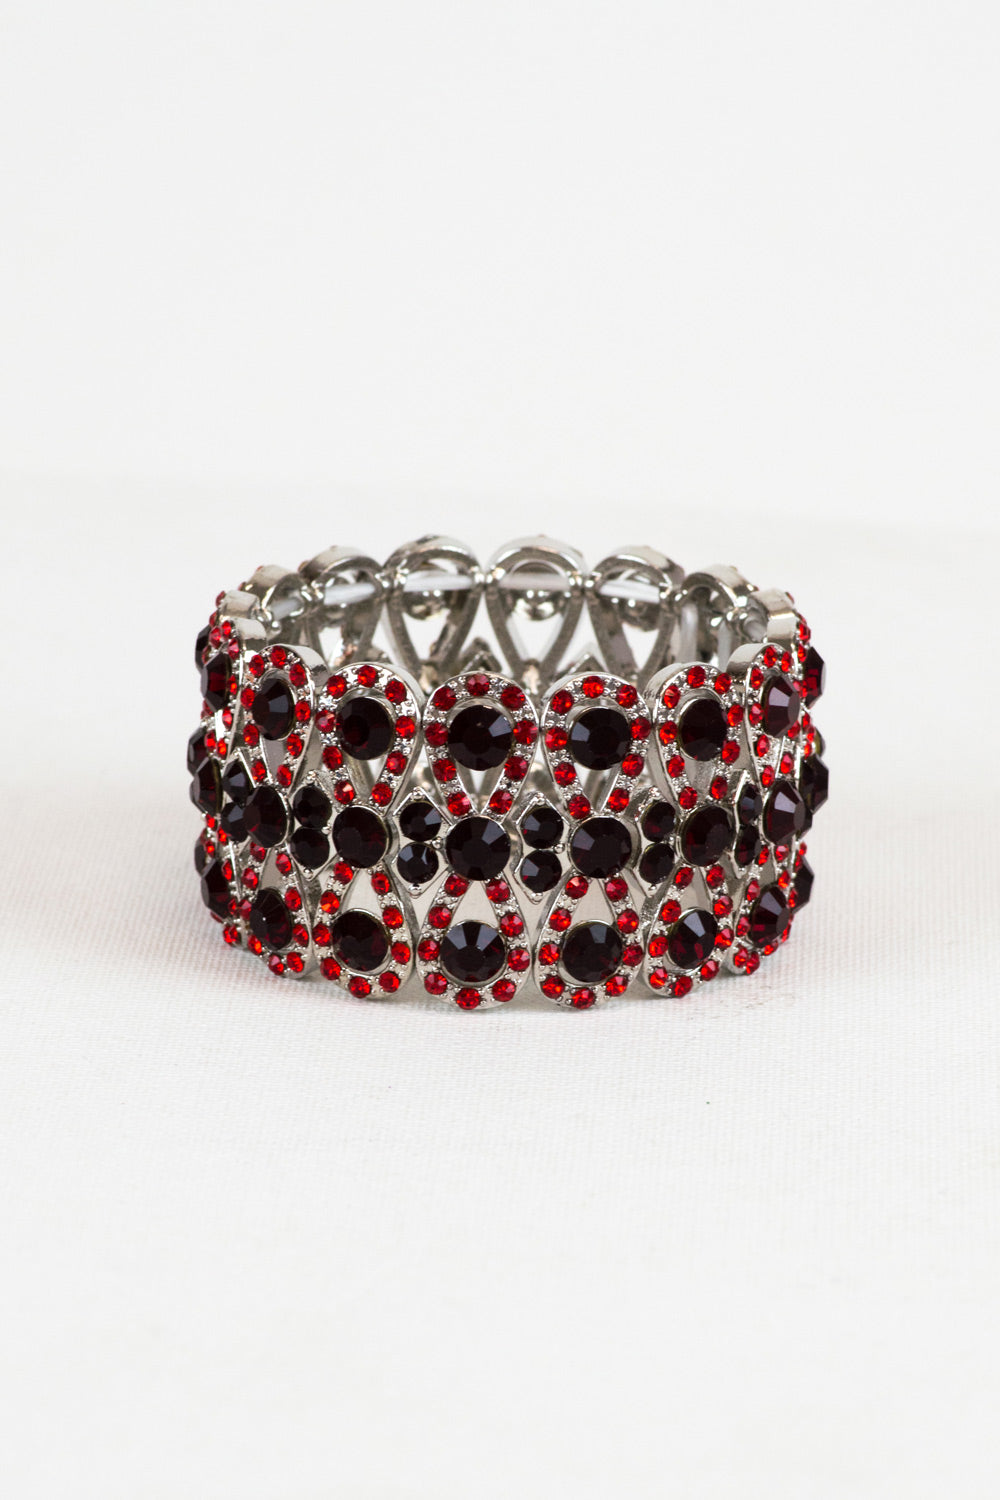 Red Crystal Fashion Bracelet for Pageant